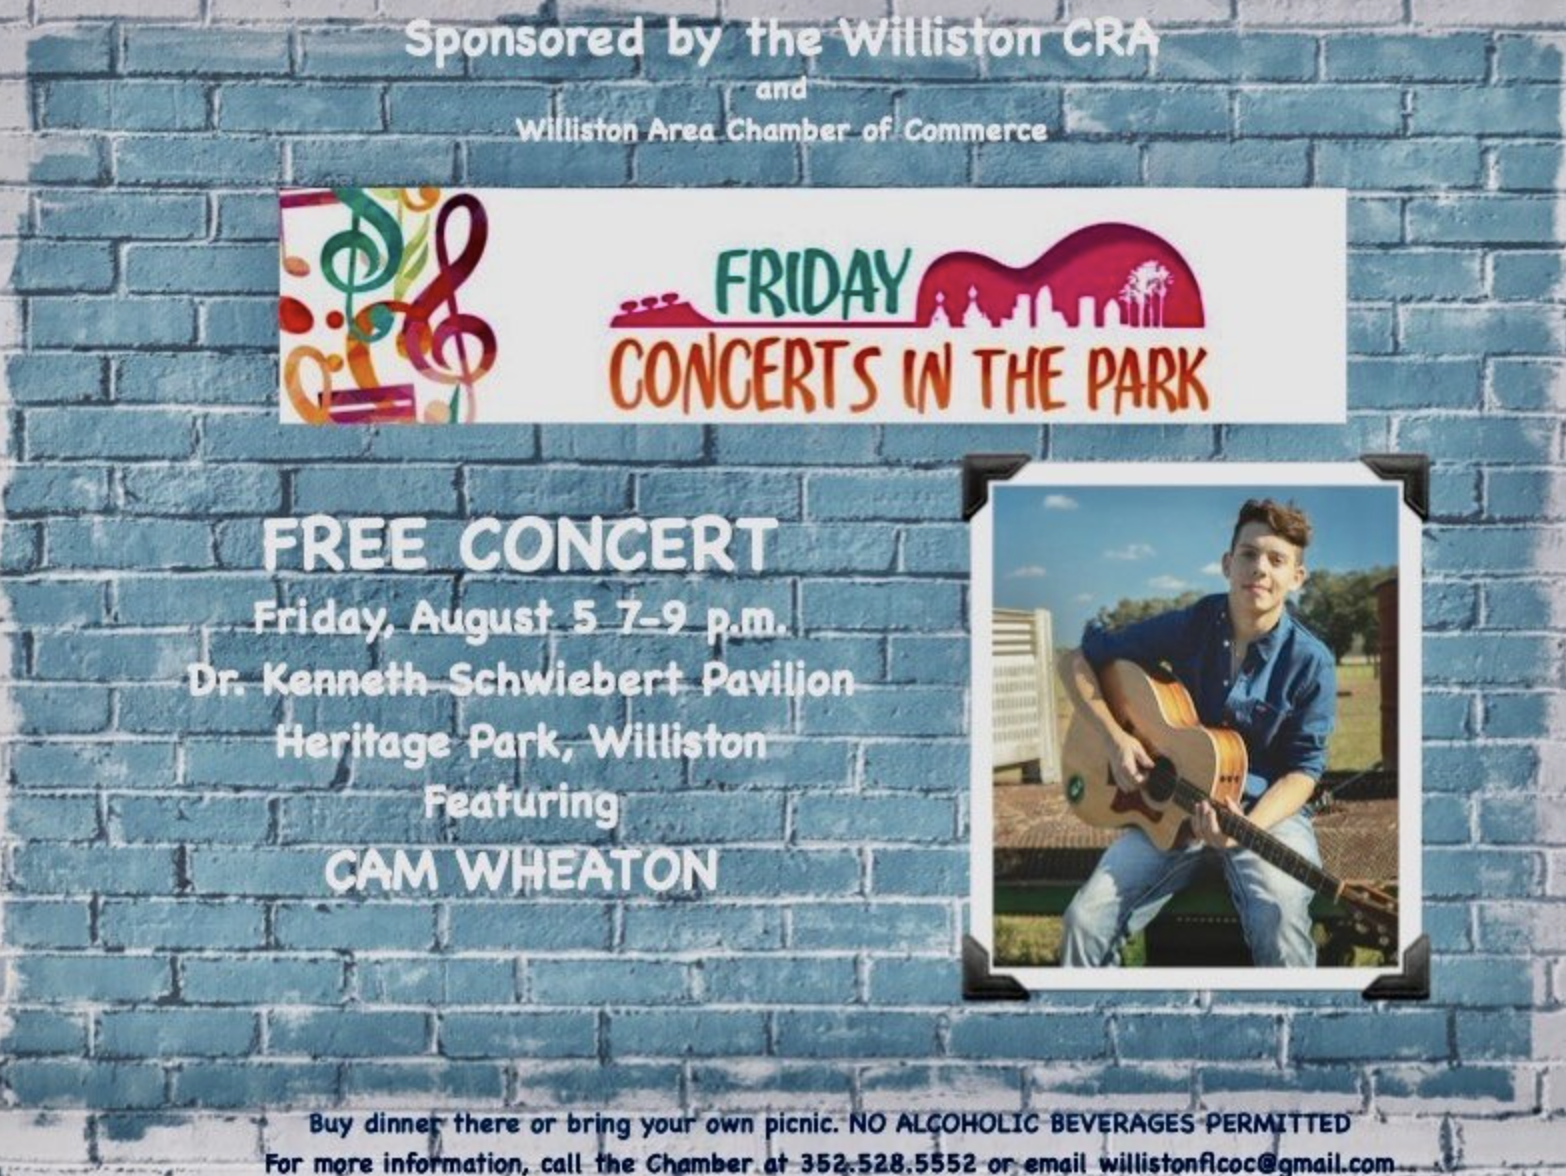 Friday Concerts in the Park at Heritage Park, Williston